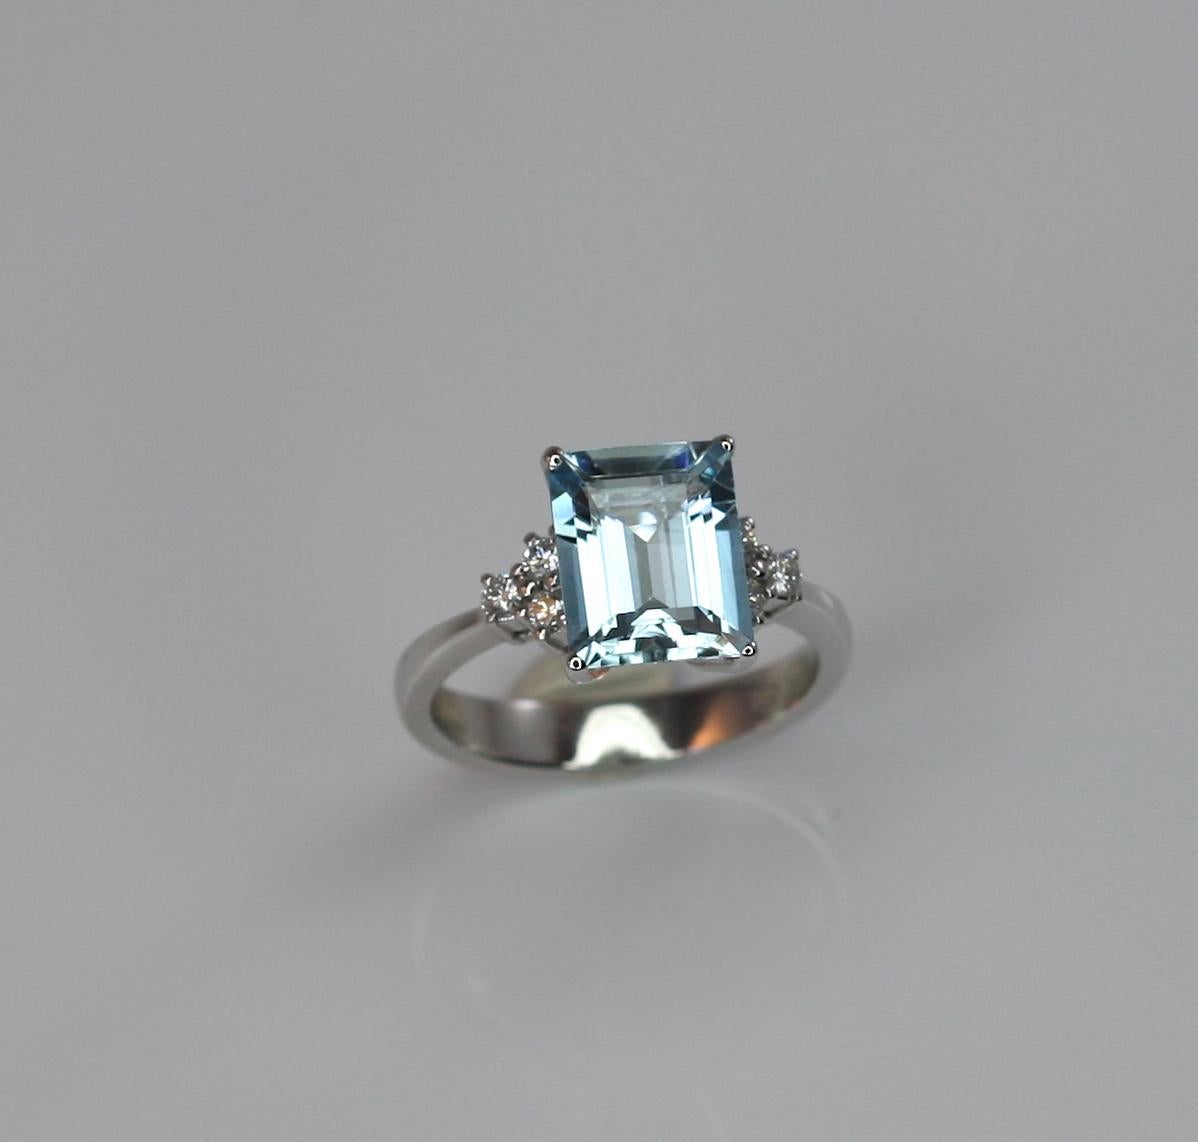 This gorgeous Aquamarine Ring designed by S.Georgios is all handmade in 18 Karat White gold and features a solitaire emerald cut Aquamarine of top quality the weight of 2,81 Carat. On the sides, we have set 6 Brilliant cut White Diamonds, the total